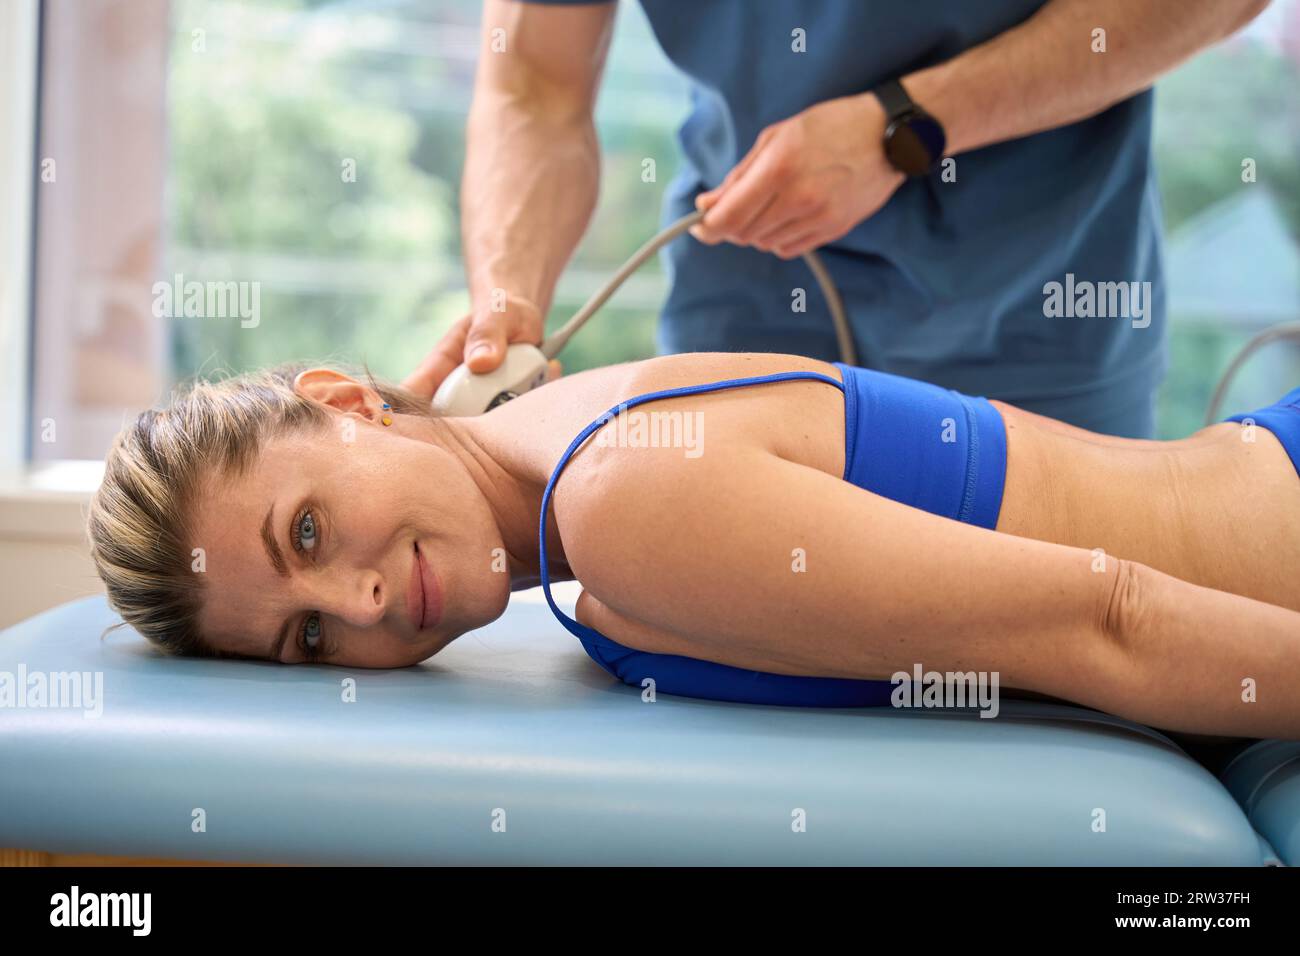 Smiling woman lying on massage couch during extracorporeal shock wave therapy Stock Photo